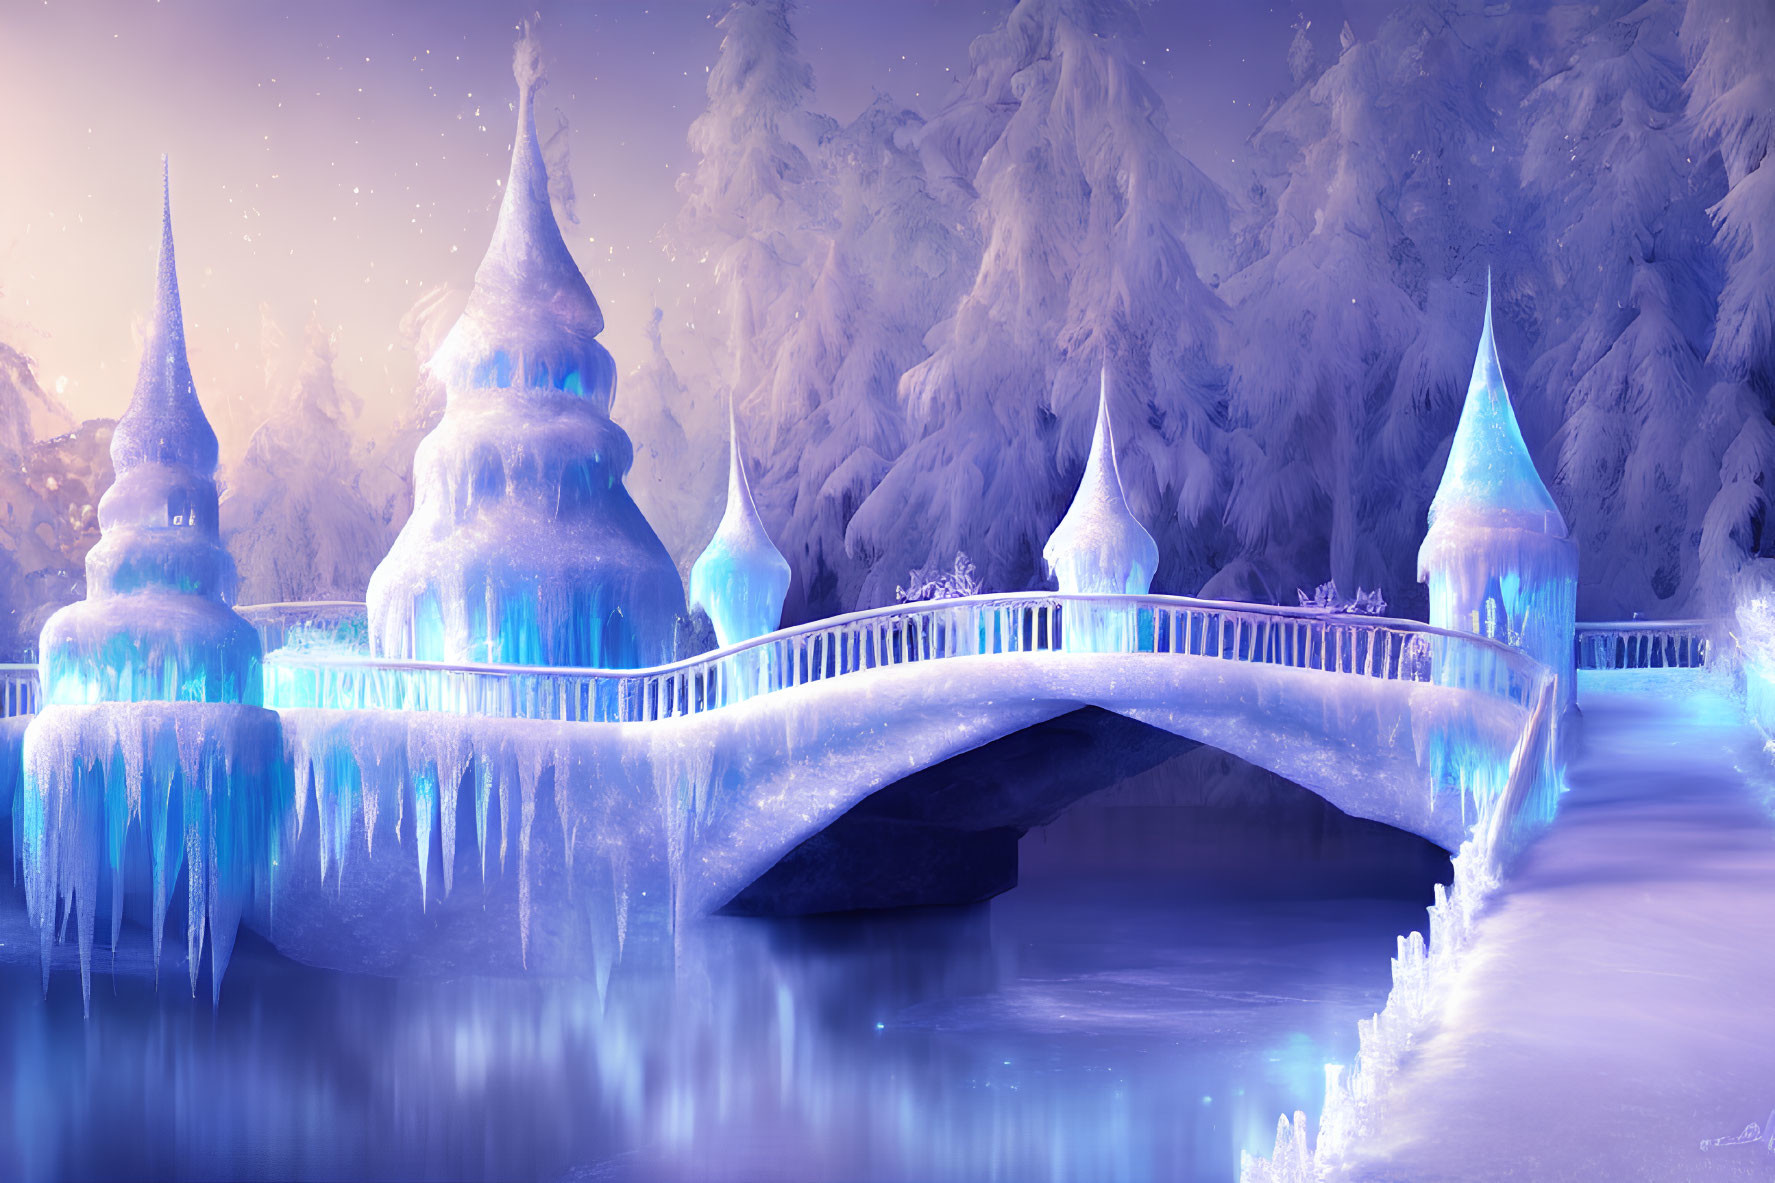 Winter landscape with icy bridge and fantasy castle in snow-covered trees